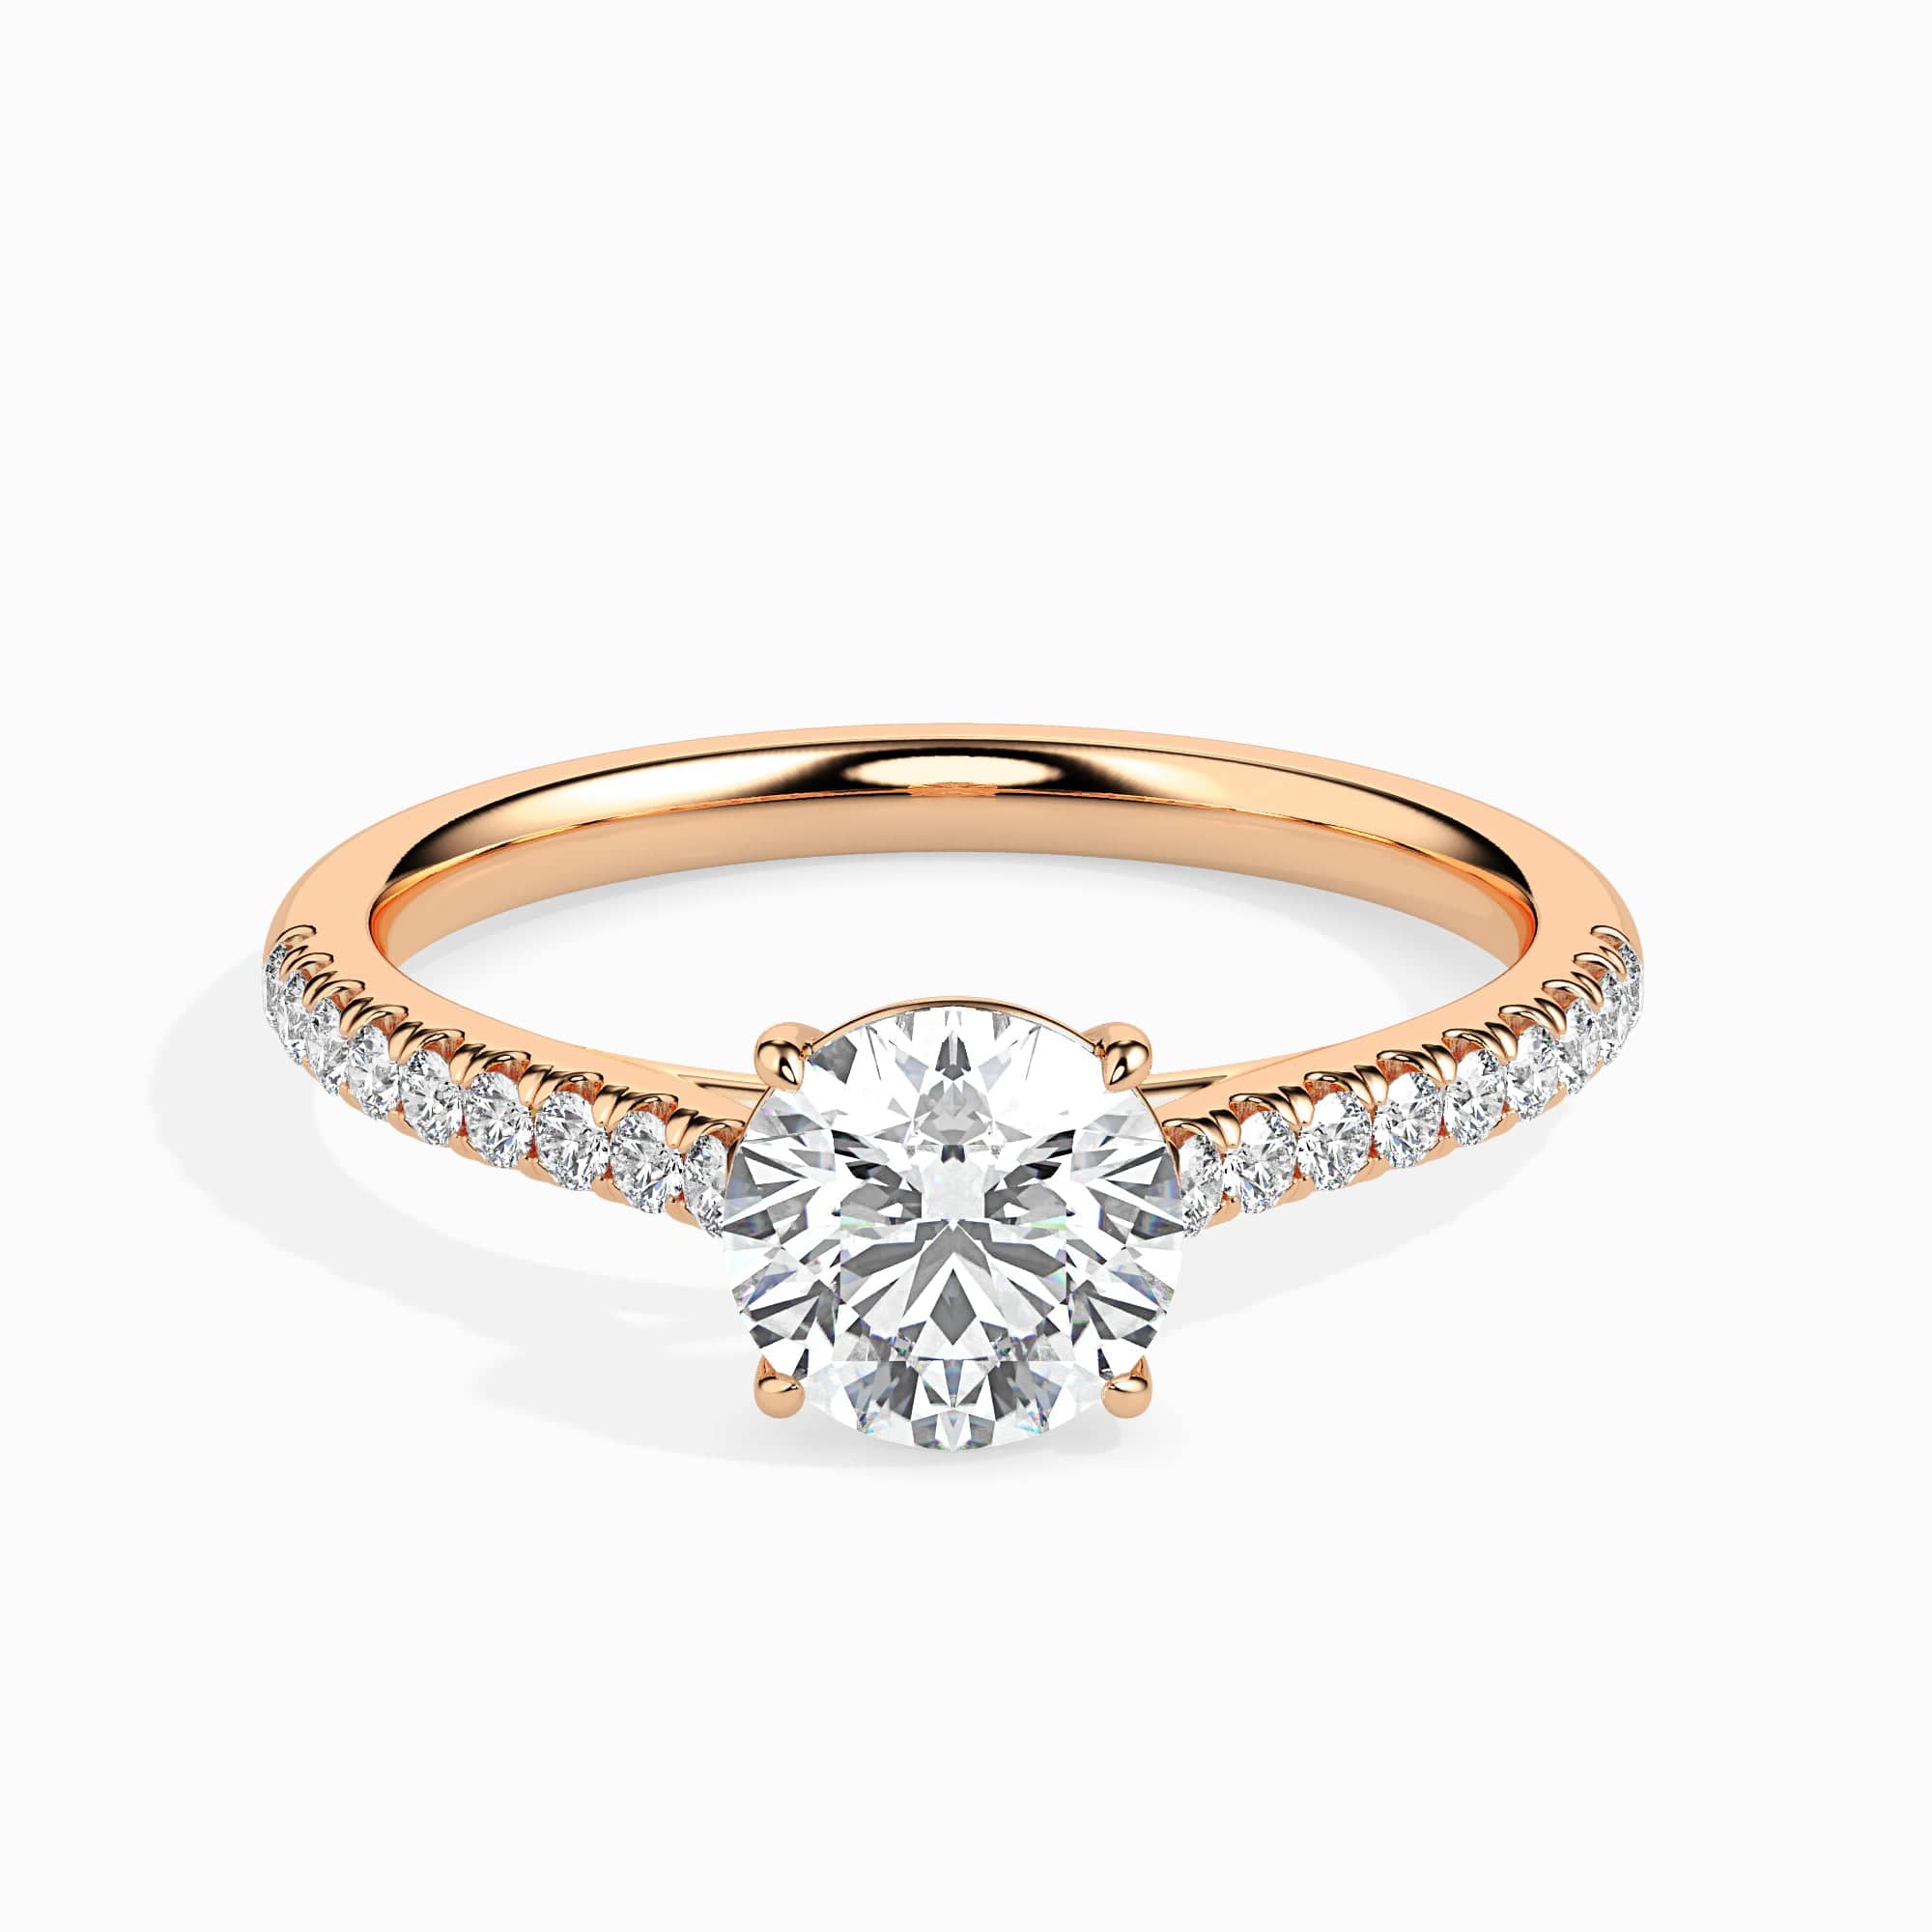 Buy quality REAL DIAMOND FANCY RING FOR LADIES in Ahmedabad